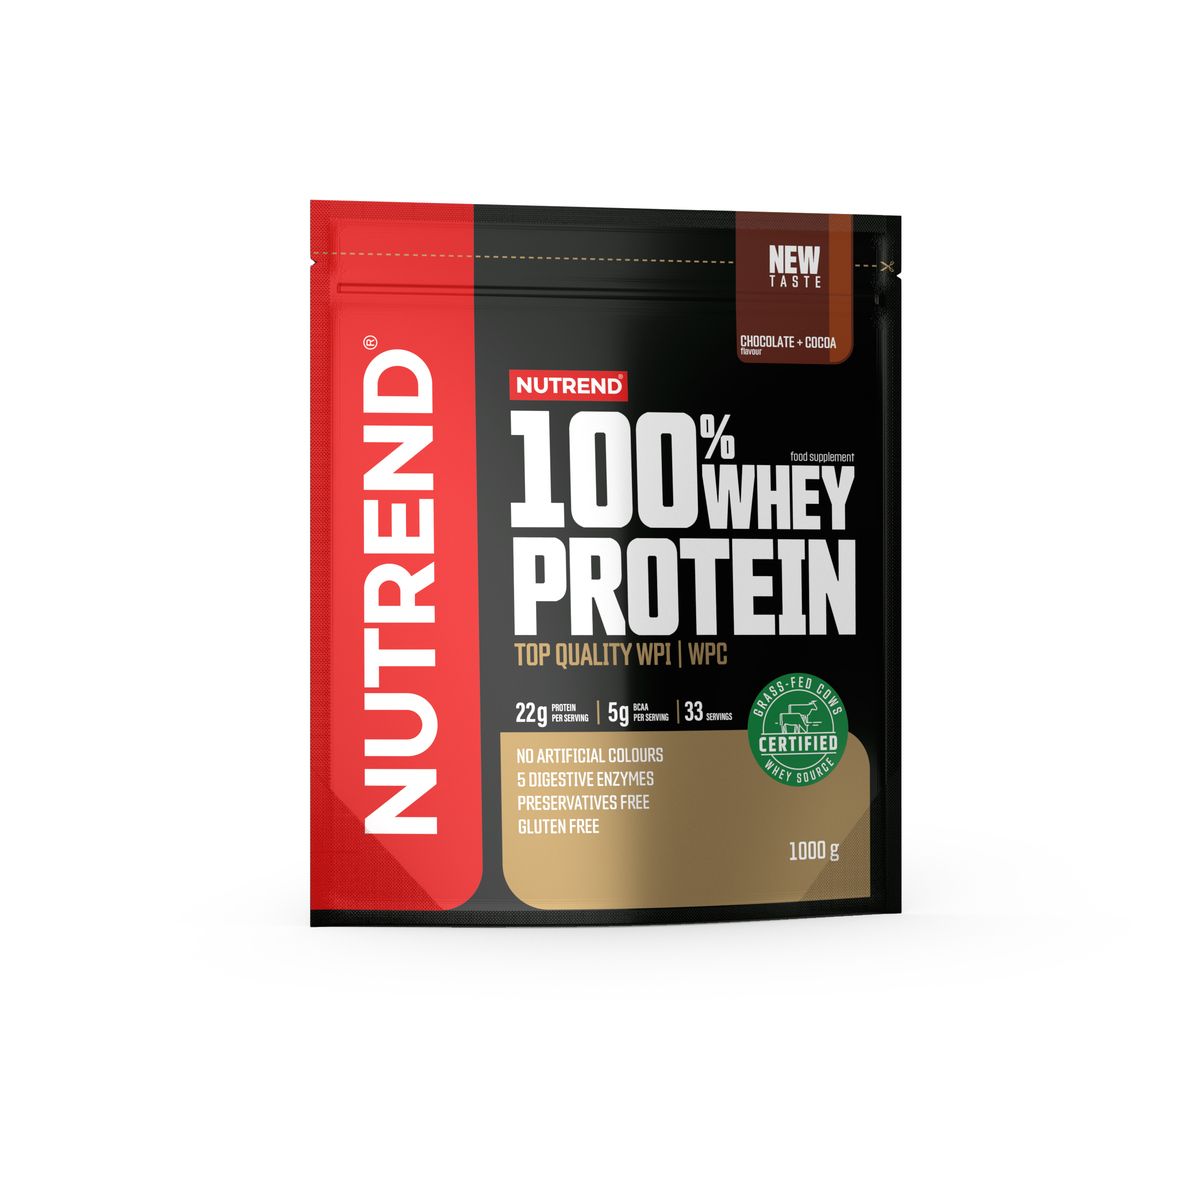 Concentrate Proteice - NUTREND 100% WHEY PROTEIN 1Kg Capsuni, advancednutrition.ro